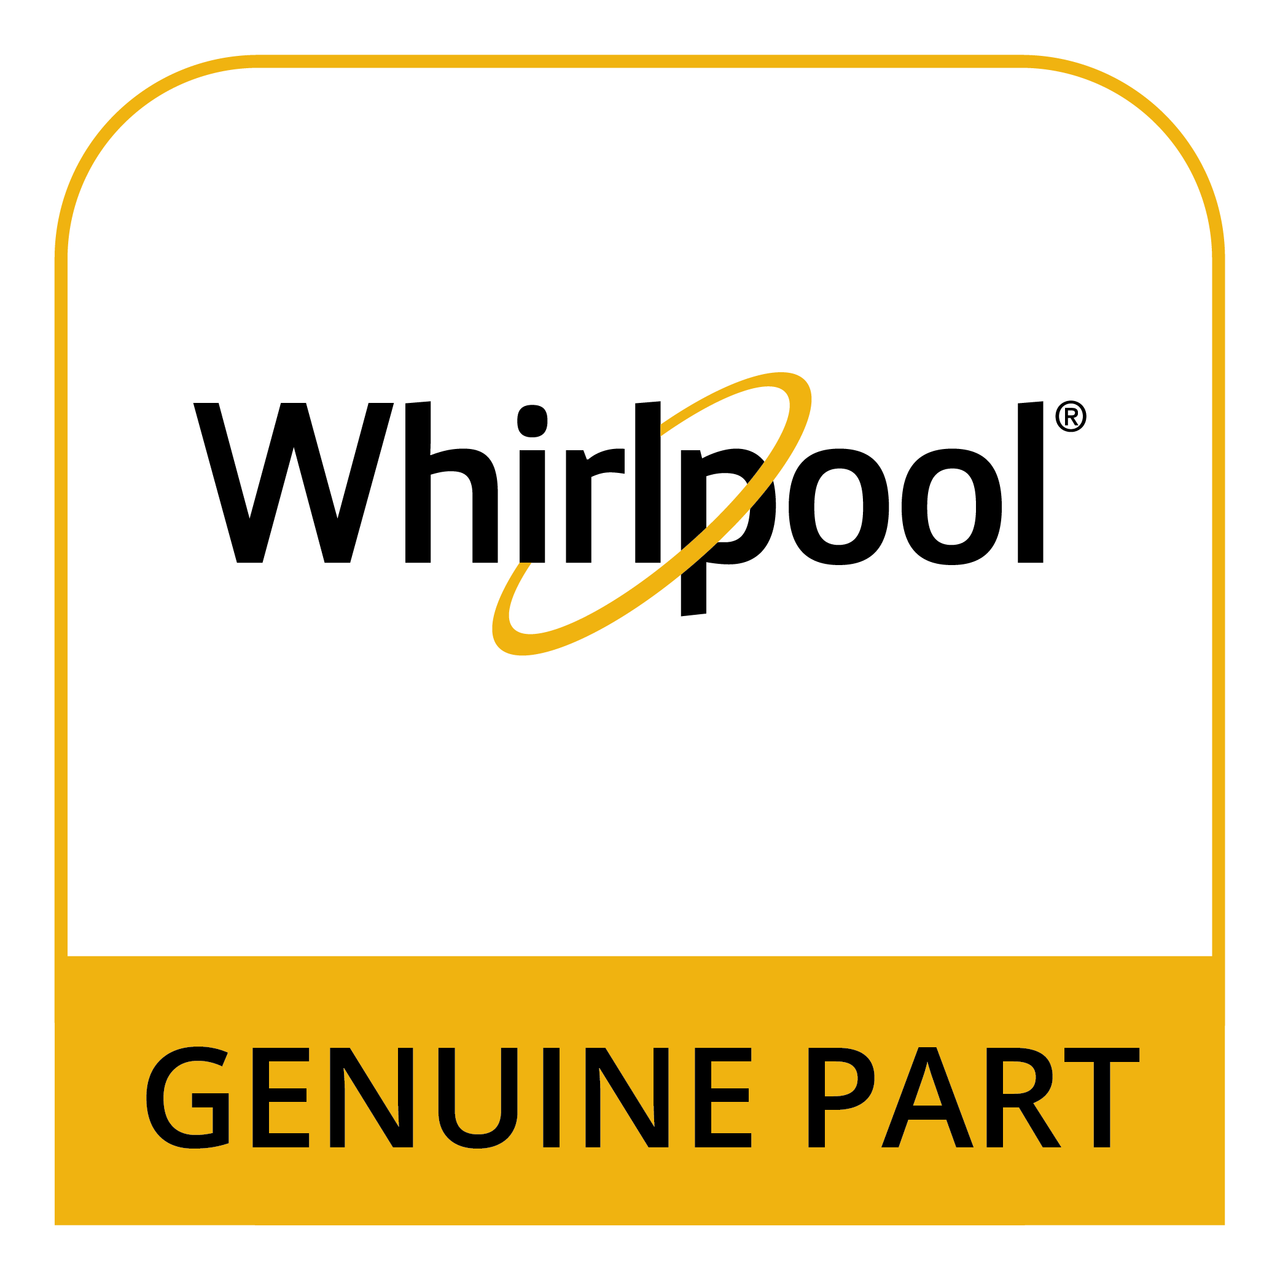 Whirlpool WFR100804 - 1 1/2" Ext *Non-Wise* - Genuine Part